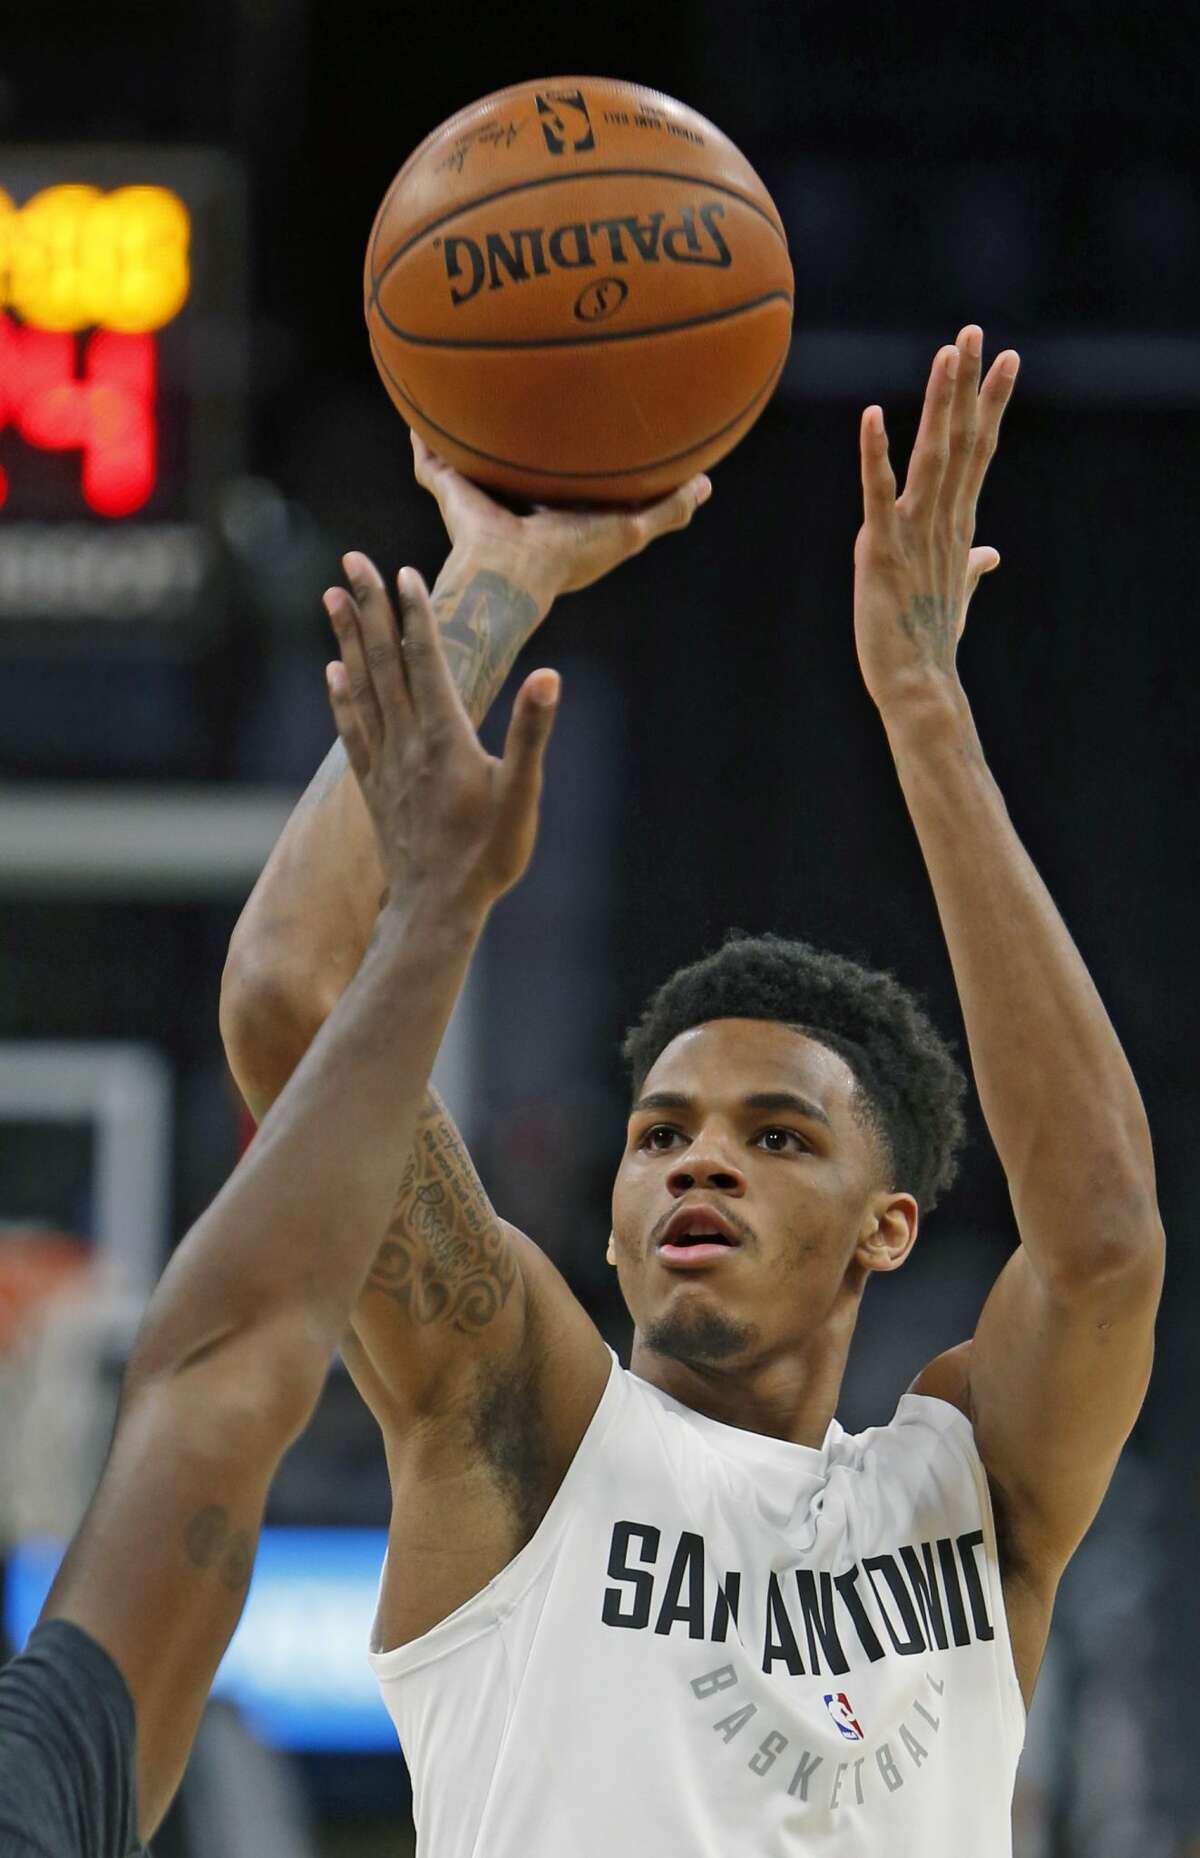 SAN ANTONIO, TX - NOVEMBER 17 : Dejounte Murray #5 of the San Antonio Spurs takes practice shots before the start of their game against the Oklahoma City Thunder at AT&T Center on November 17, 2017 in San Antonio, Texas. NOTE TO USER: User expressly acknowledges and agrees that , by downloading and or using this photograph, User is consenting to the terms and conditions of the Getty Images License Agreement. (Photo by Ronald Cortes/Getty Images)